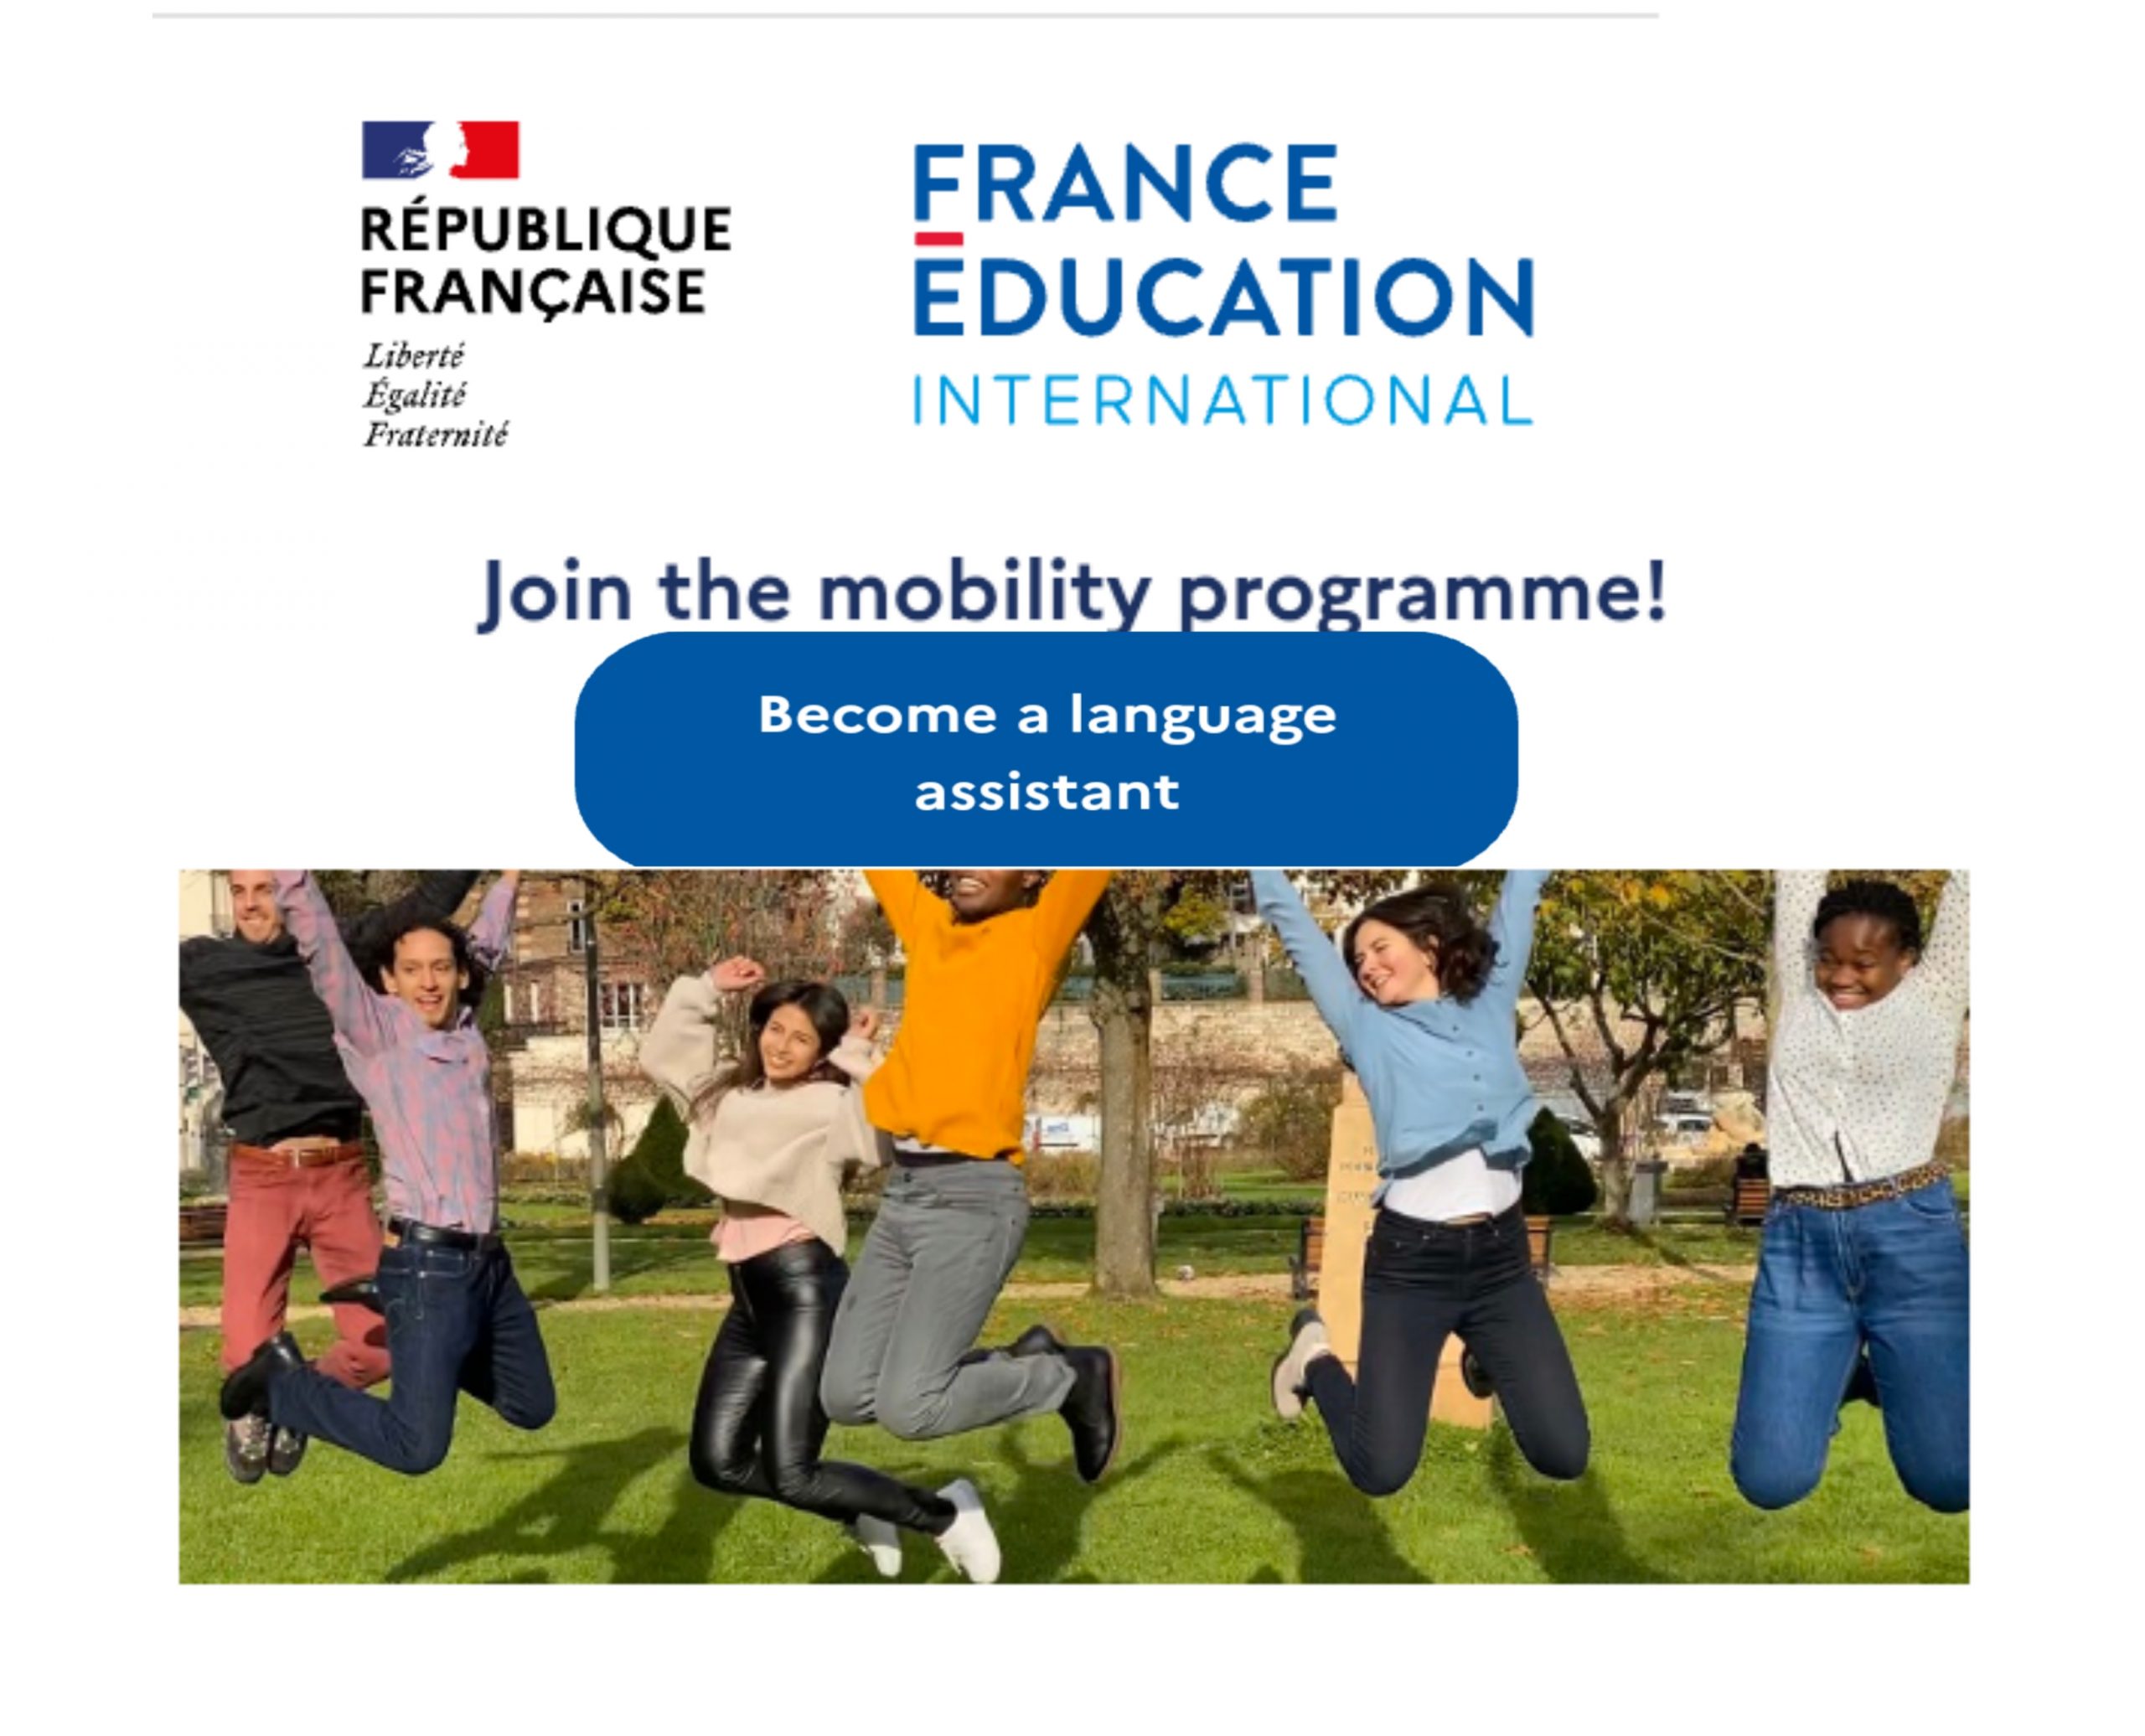 20221006 222533 scaled - Visa and Relocation Sponsorsed English Language Assistant in France, Application is Open